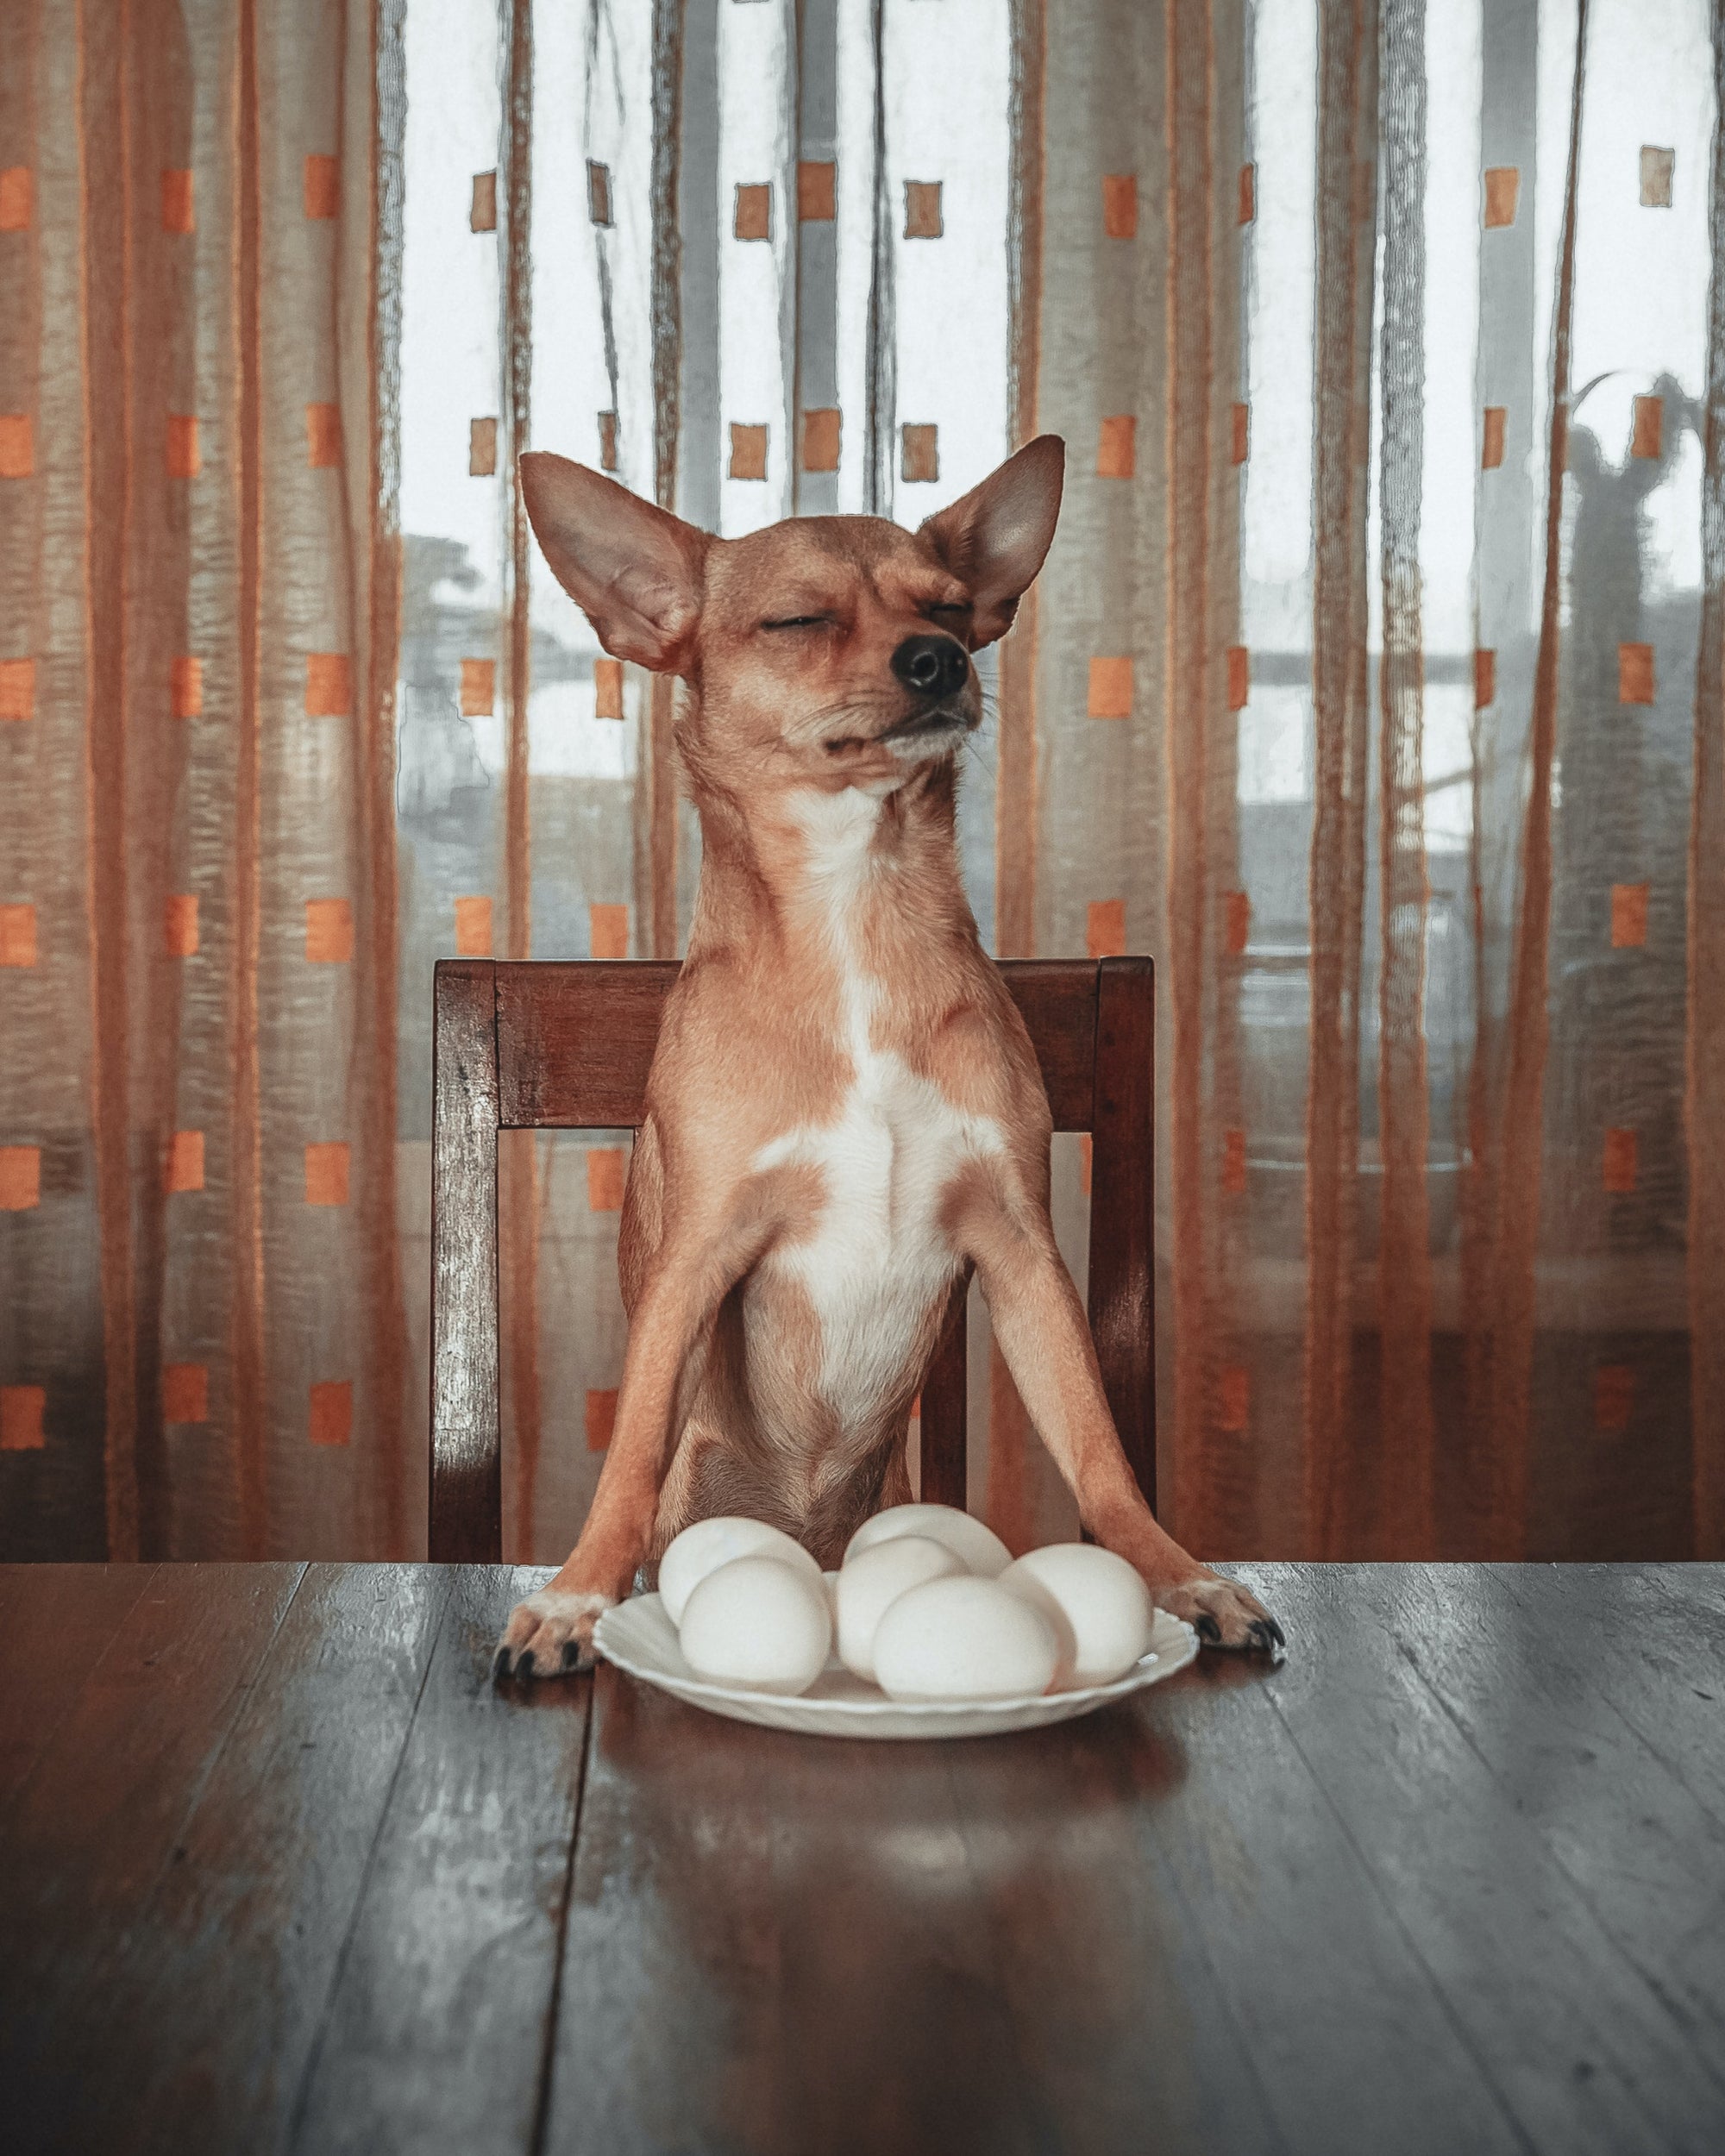 Chihuahua on a chair at a table with a plate of eggs in front of it